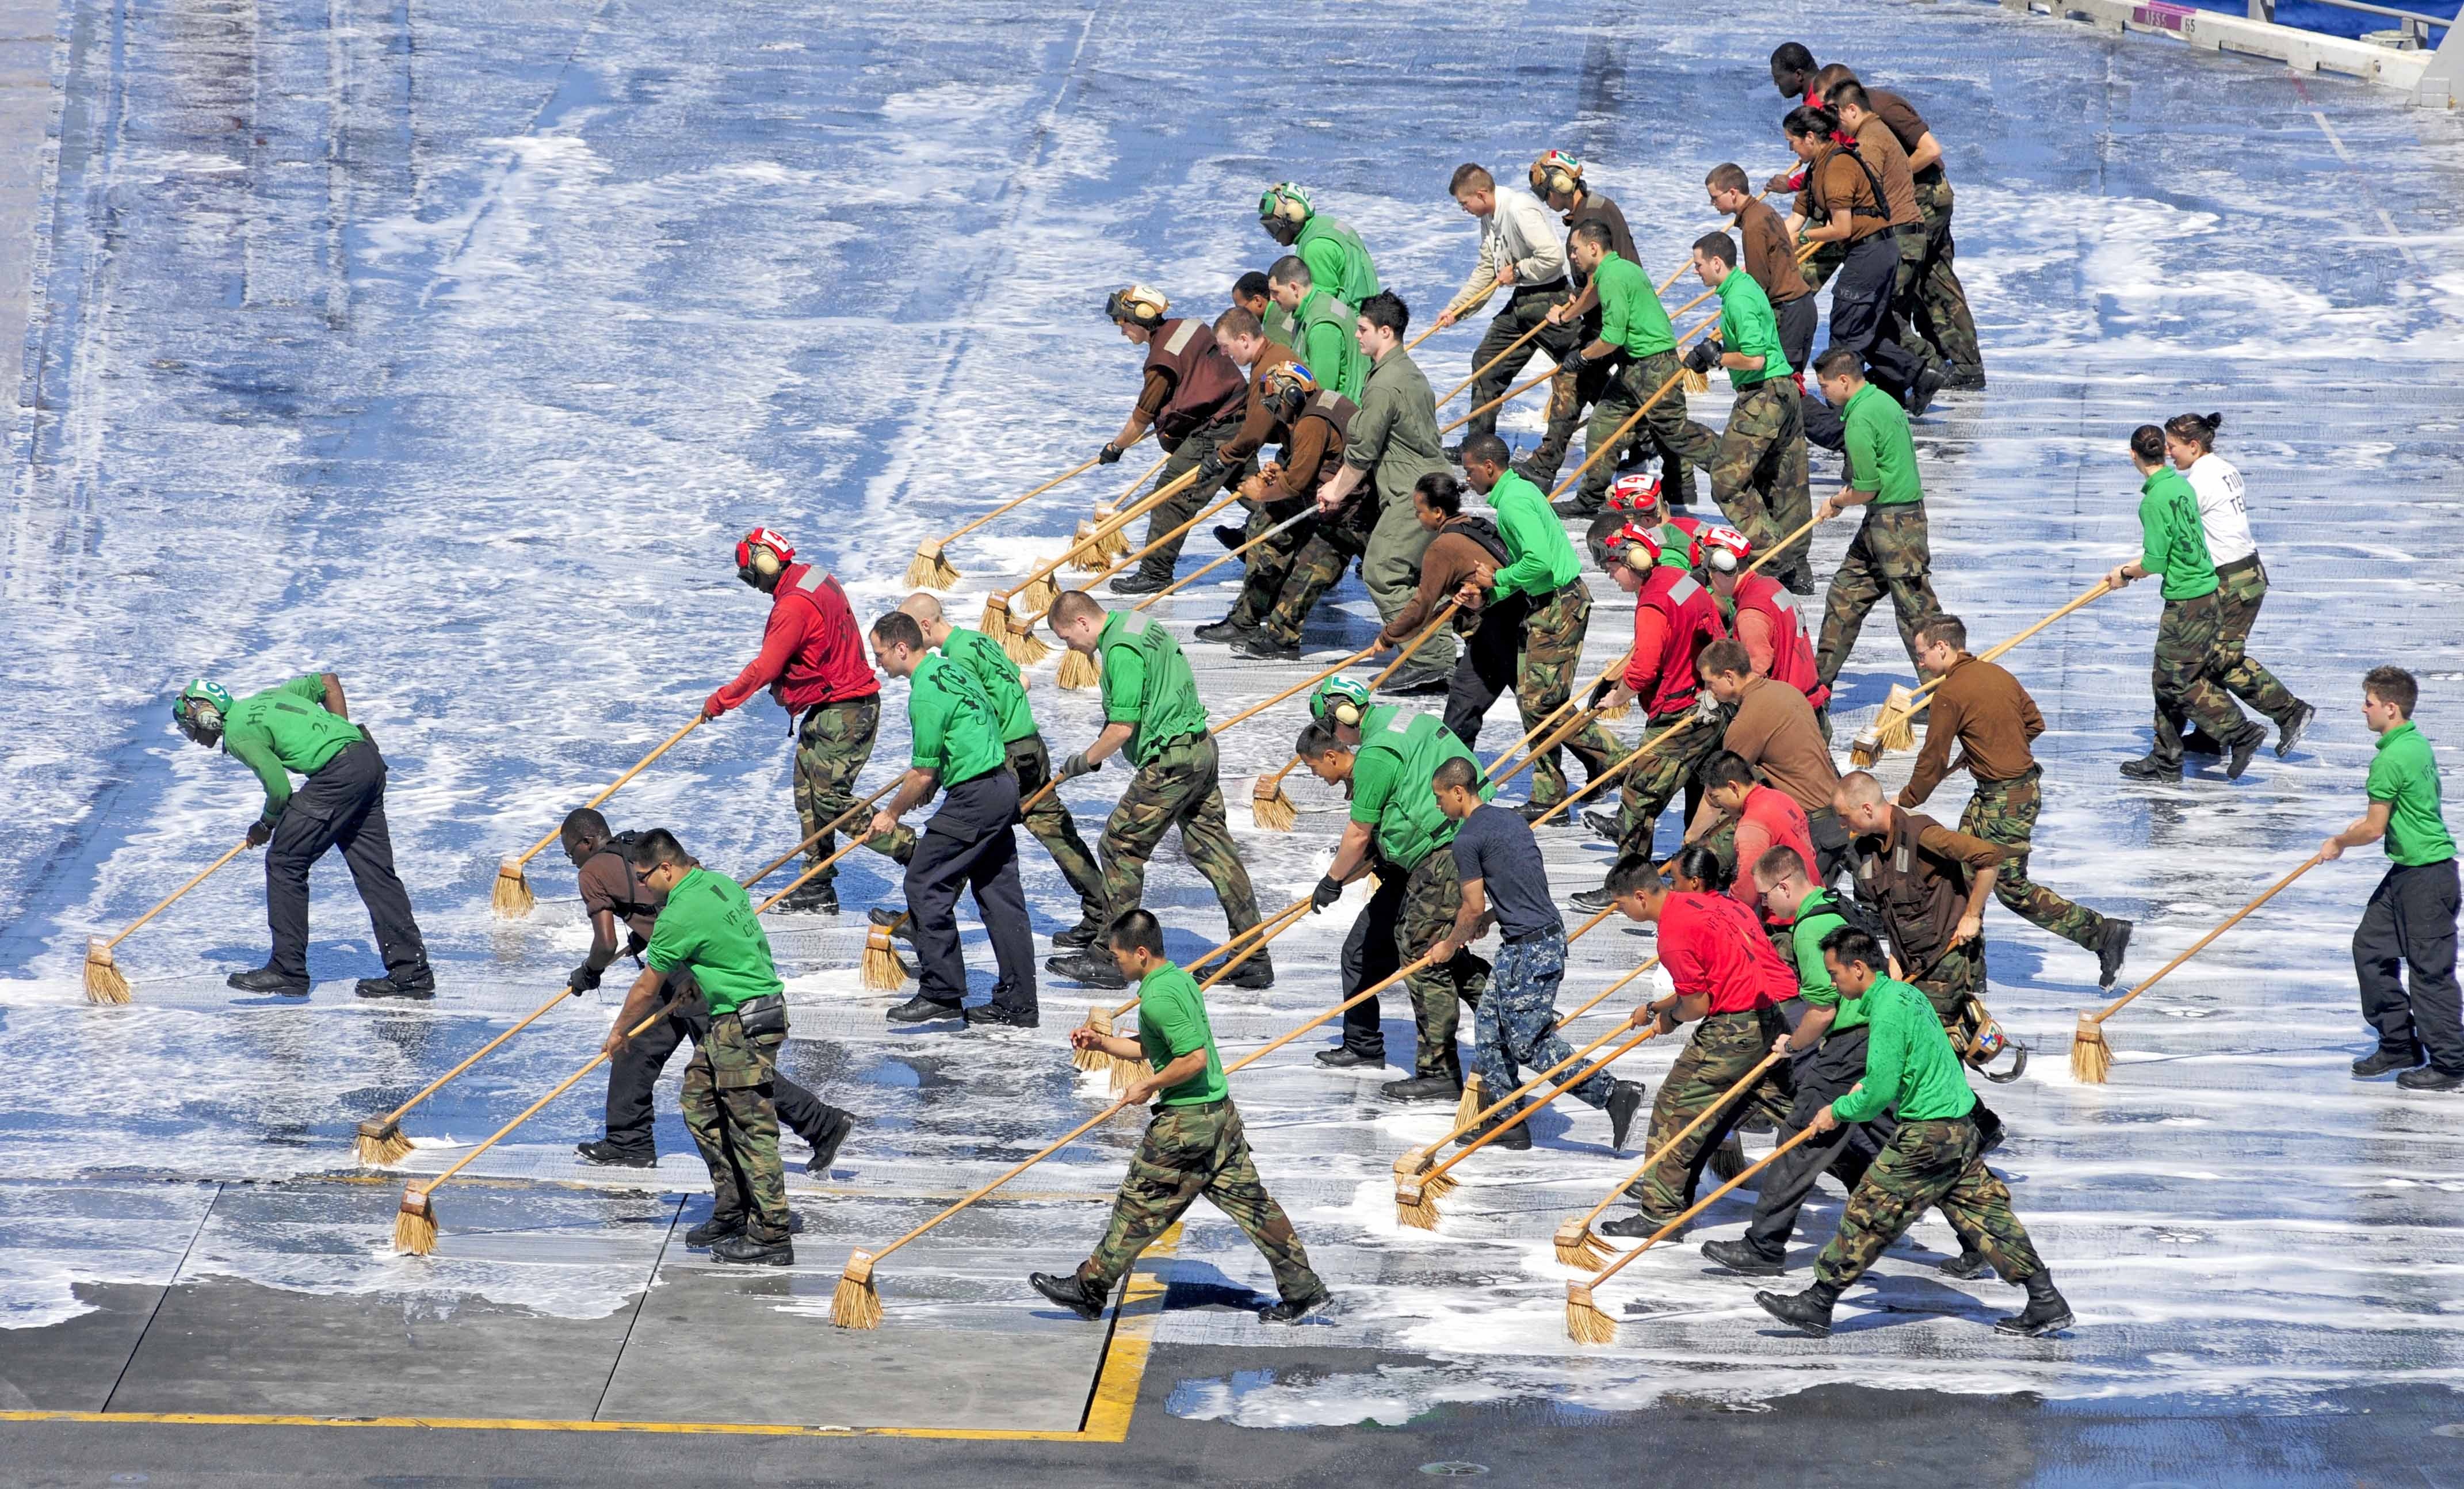 Navy sweepers photo